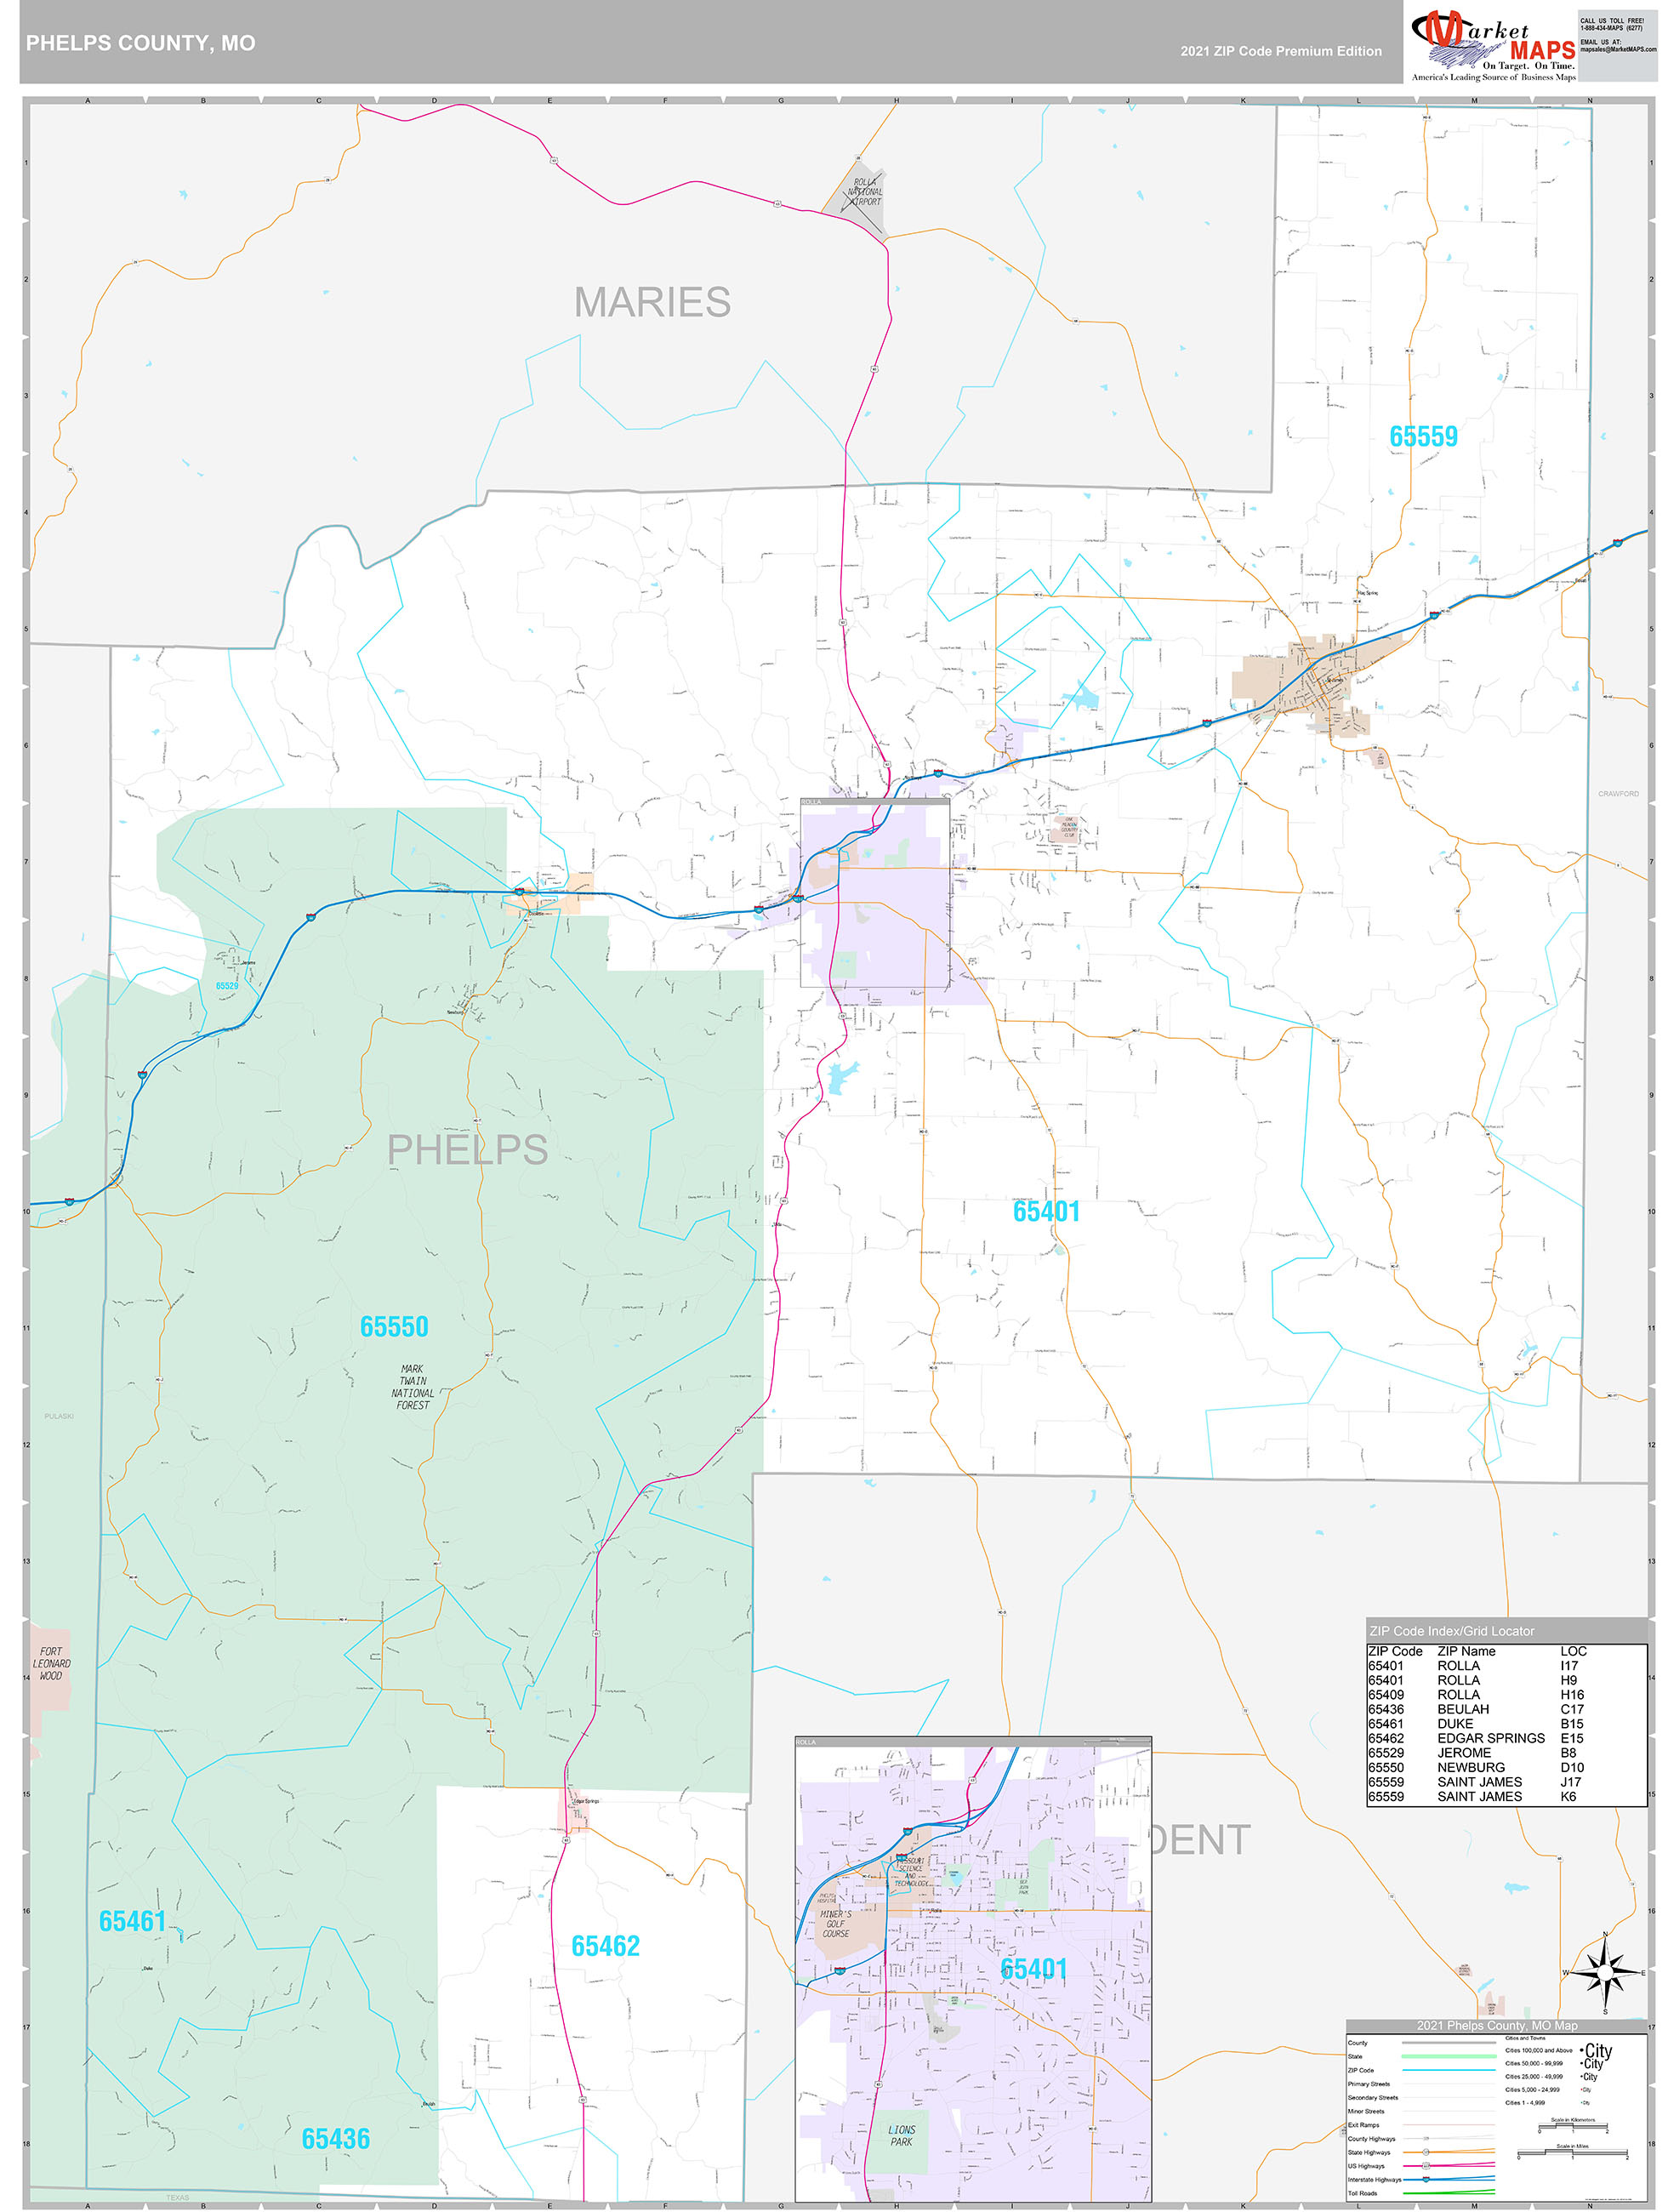 Phelps County, MO Wall Map Premium Style by MarketMAPS MapSales